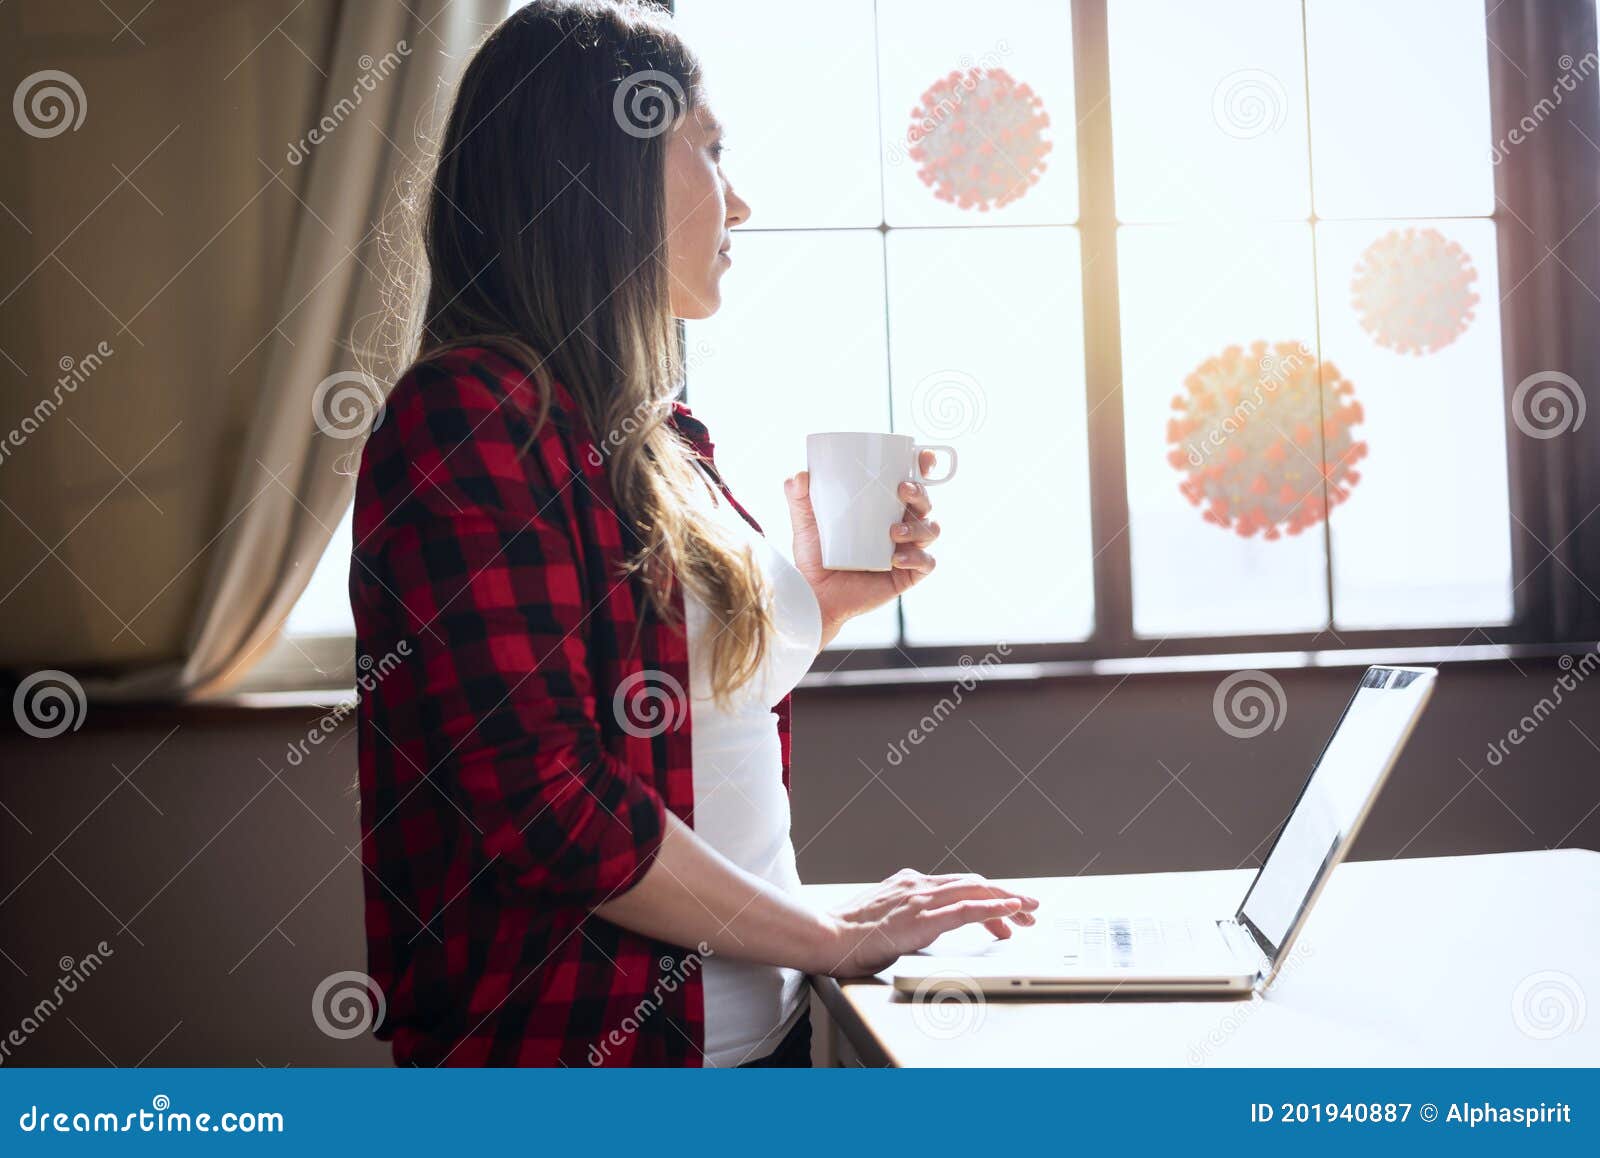 woman teleworker works at home with a laptop. she is in smart working because outside is full of covid 19 coronavirus